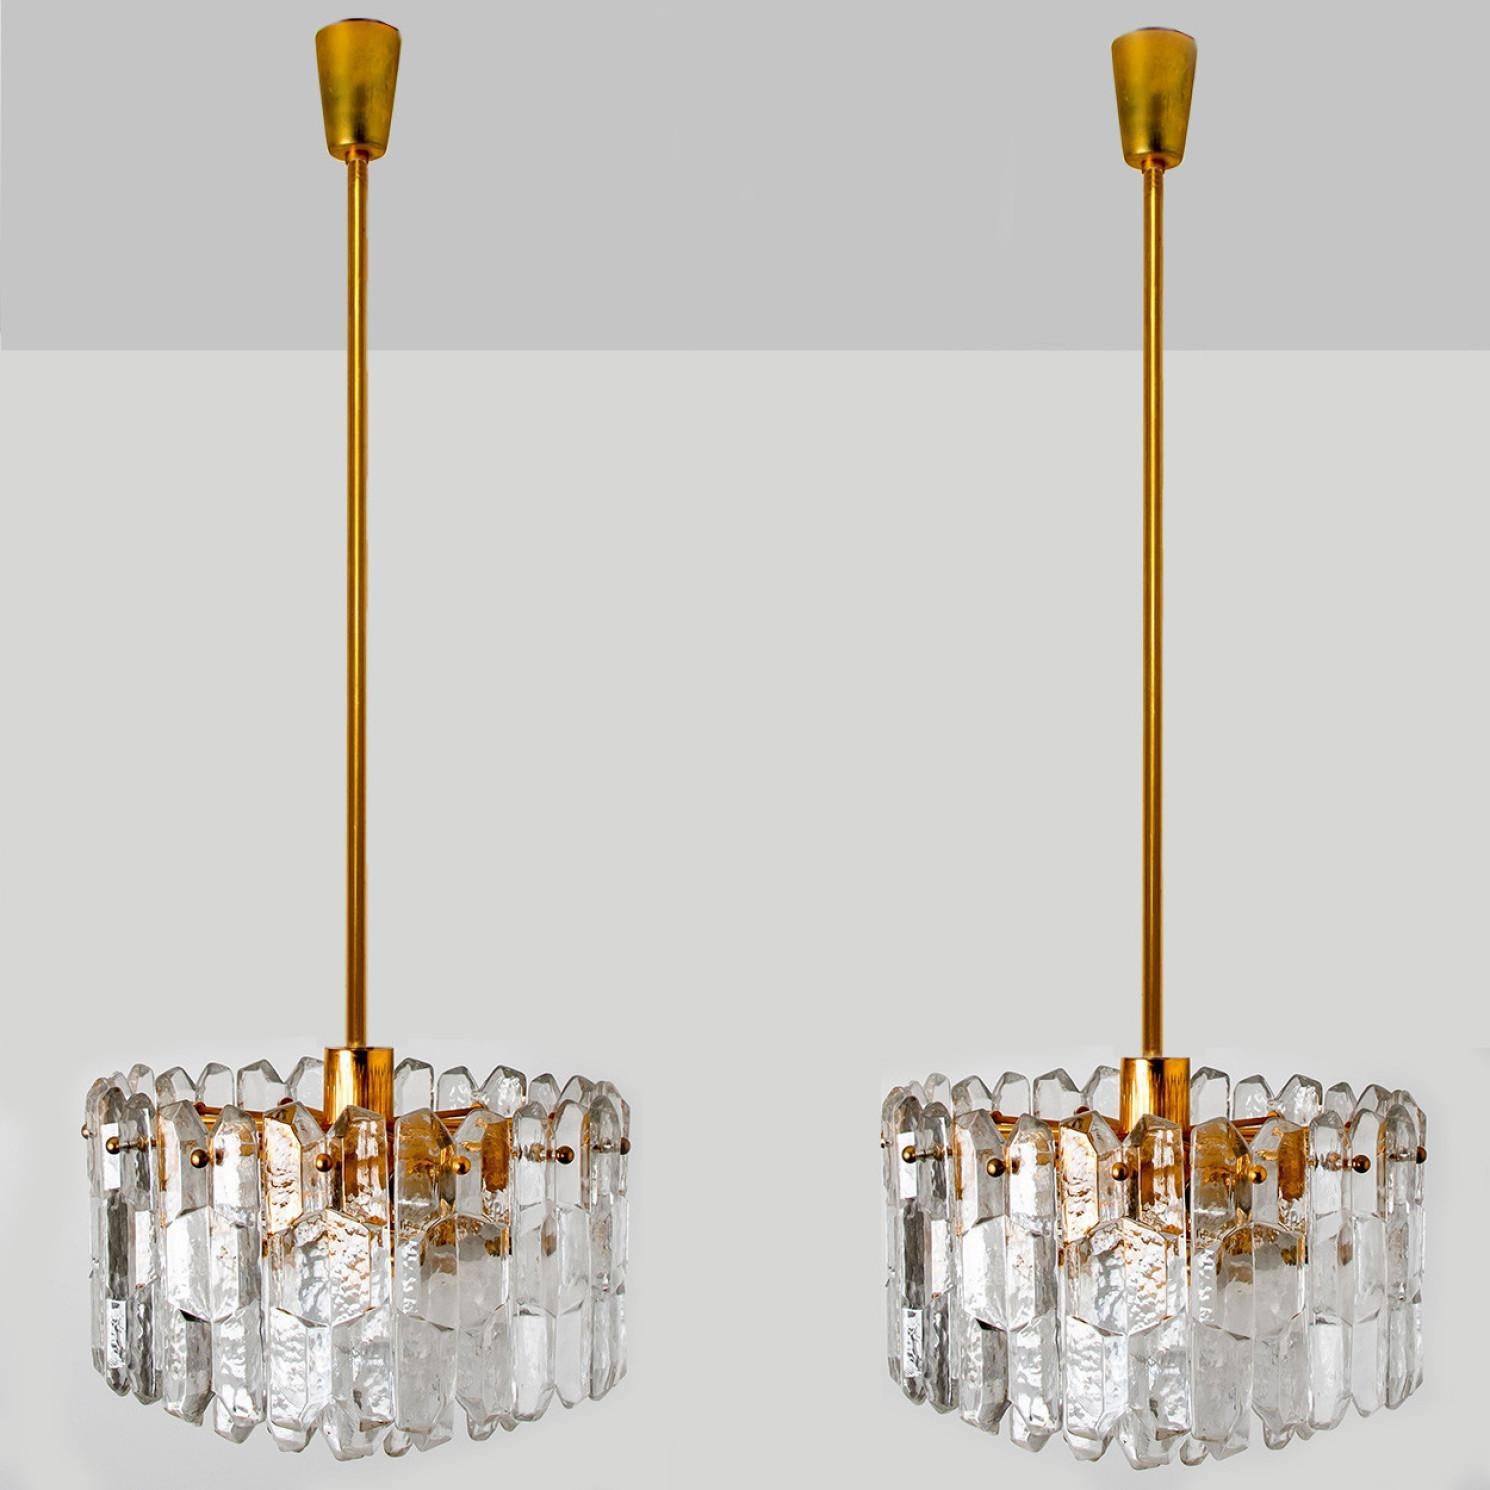 Mid-Century Modern Pair of Kalmar Chandeliers or Pendant Lights 'Palazzo', Gilt Brass and Glass For Sale